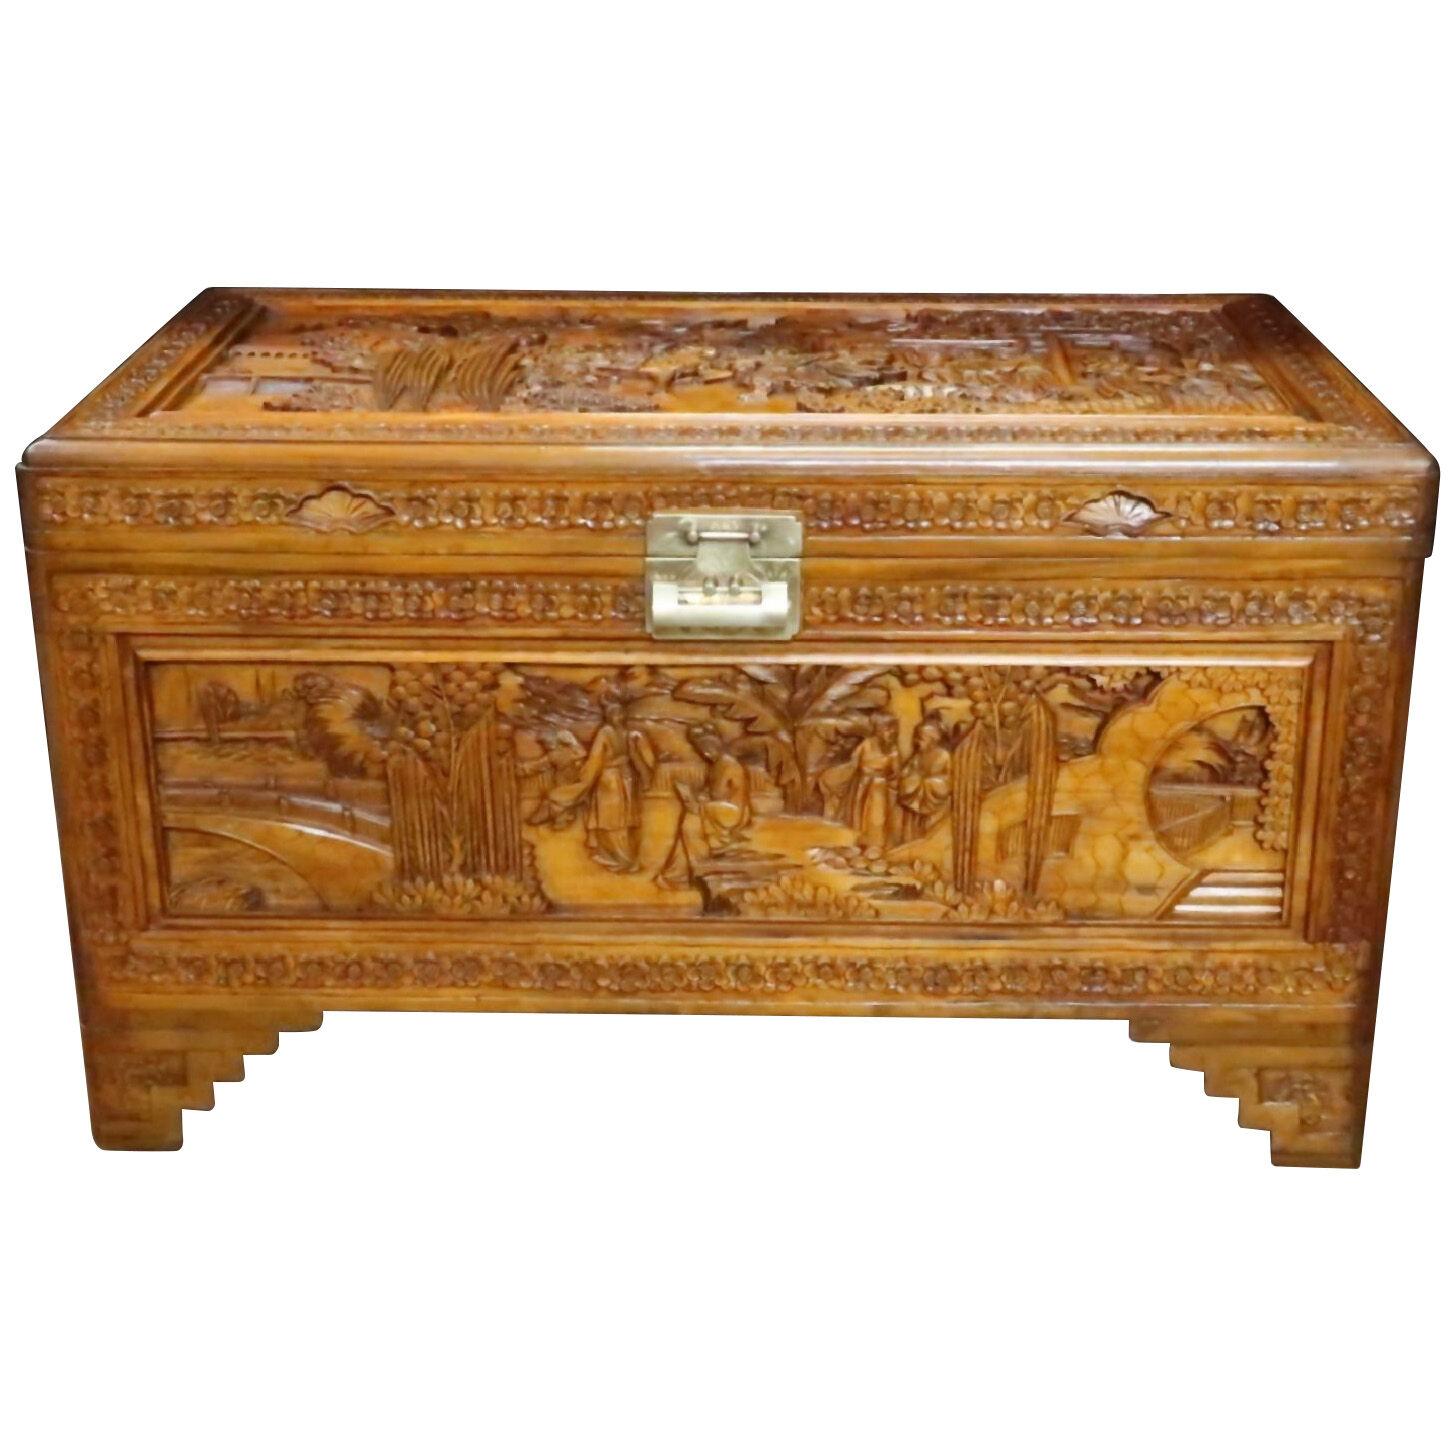 Early 20th Century Oriental Carved Maple and Camphor Wood Chest